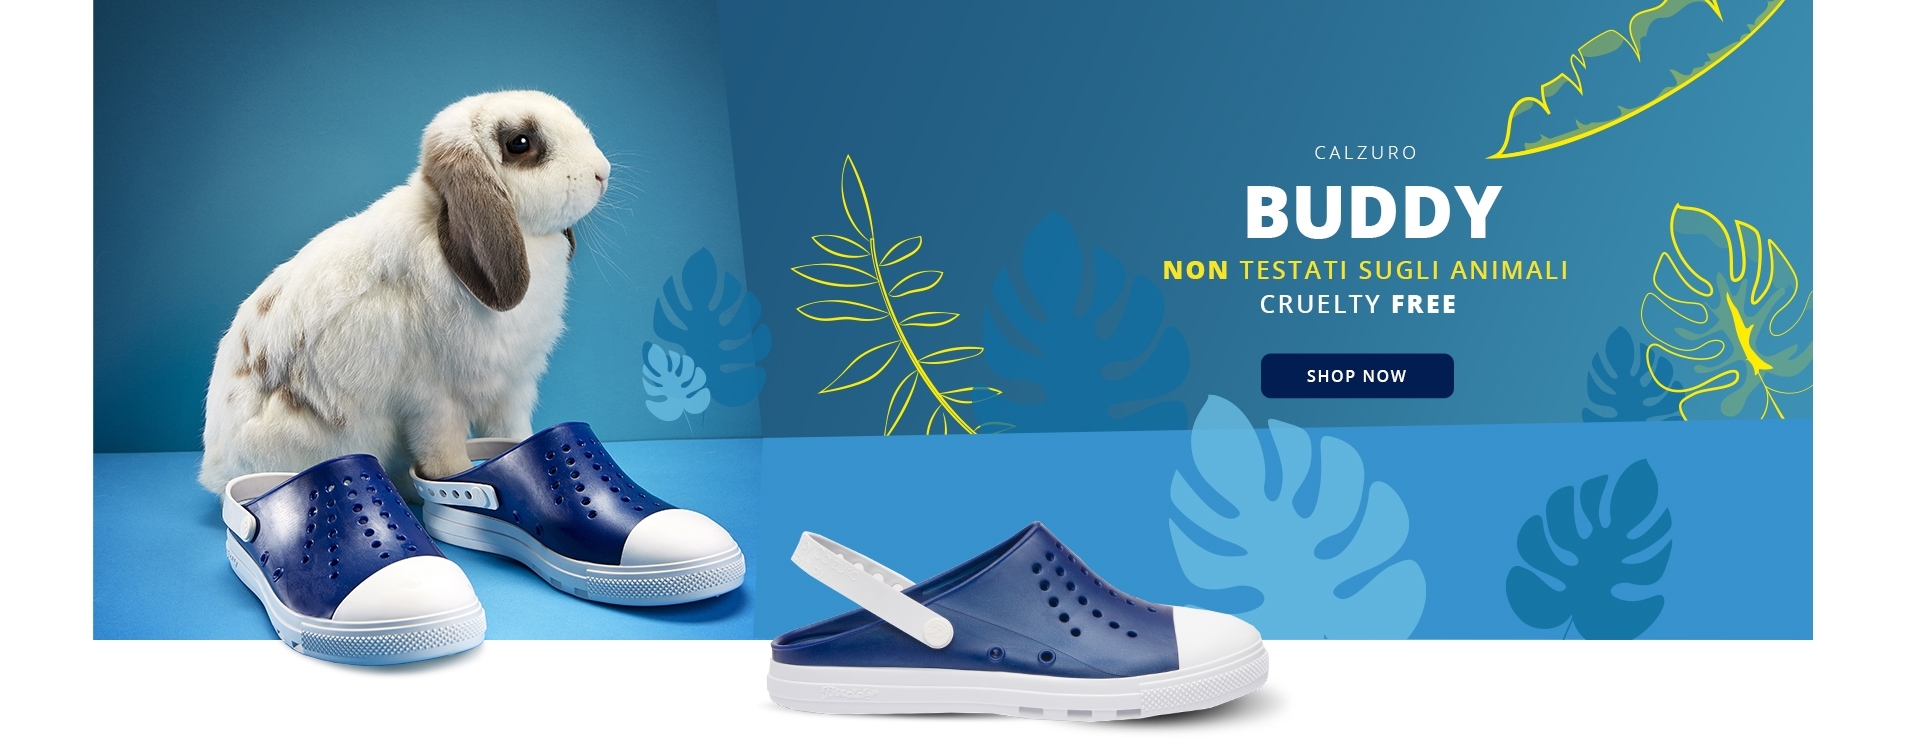 Calzuro: the footwear designed for the wellness of your feet